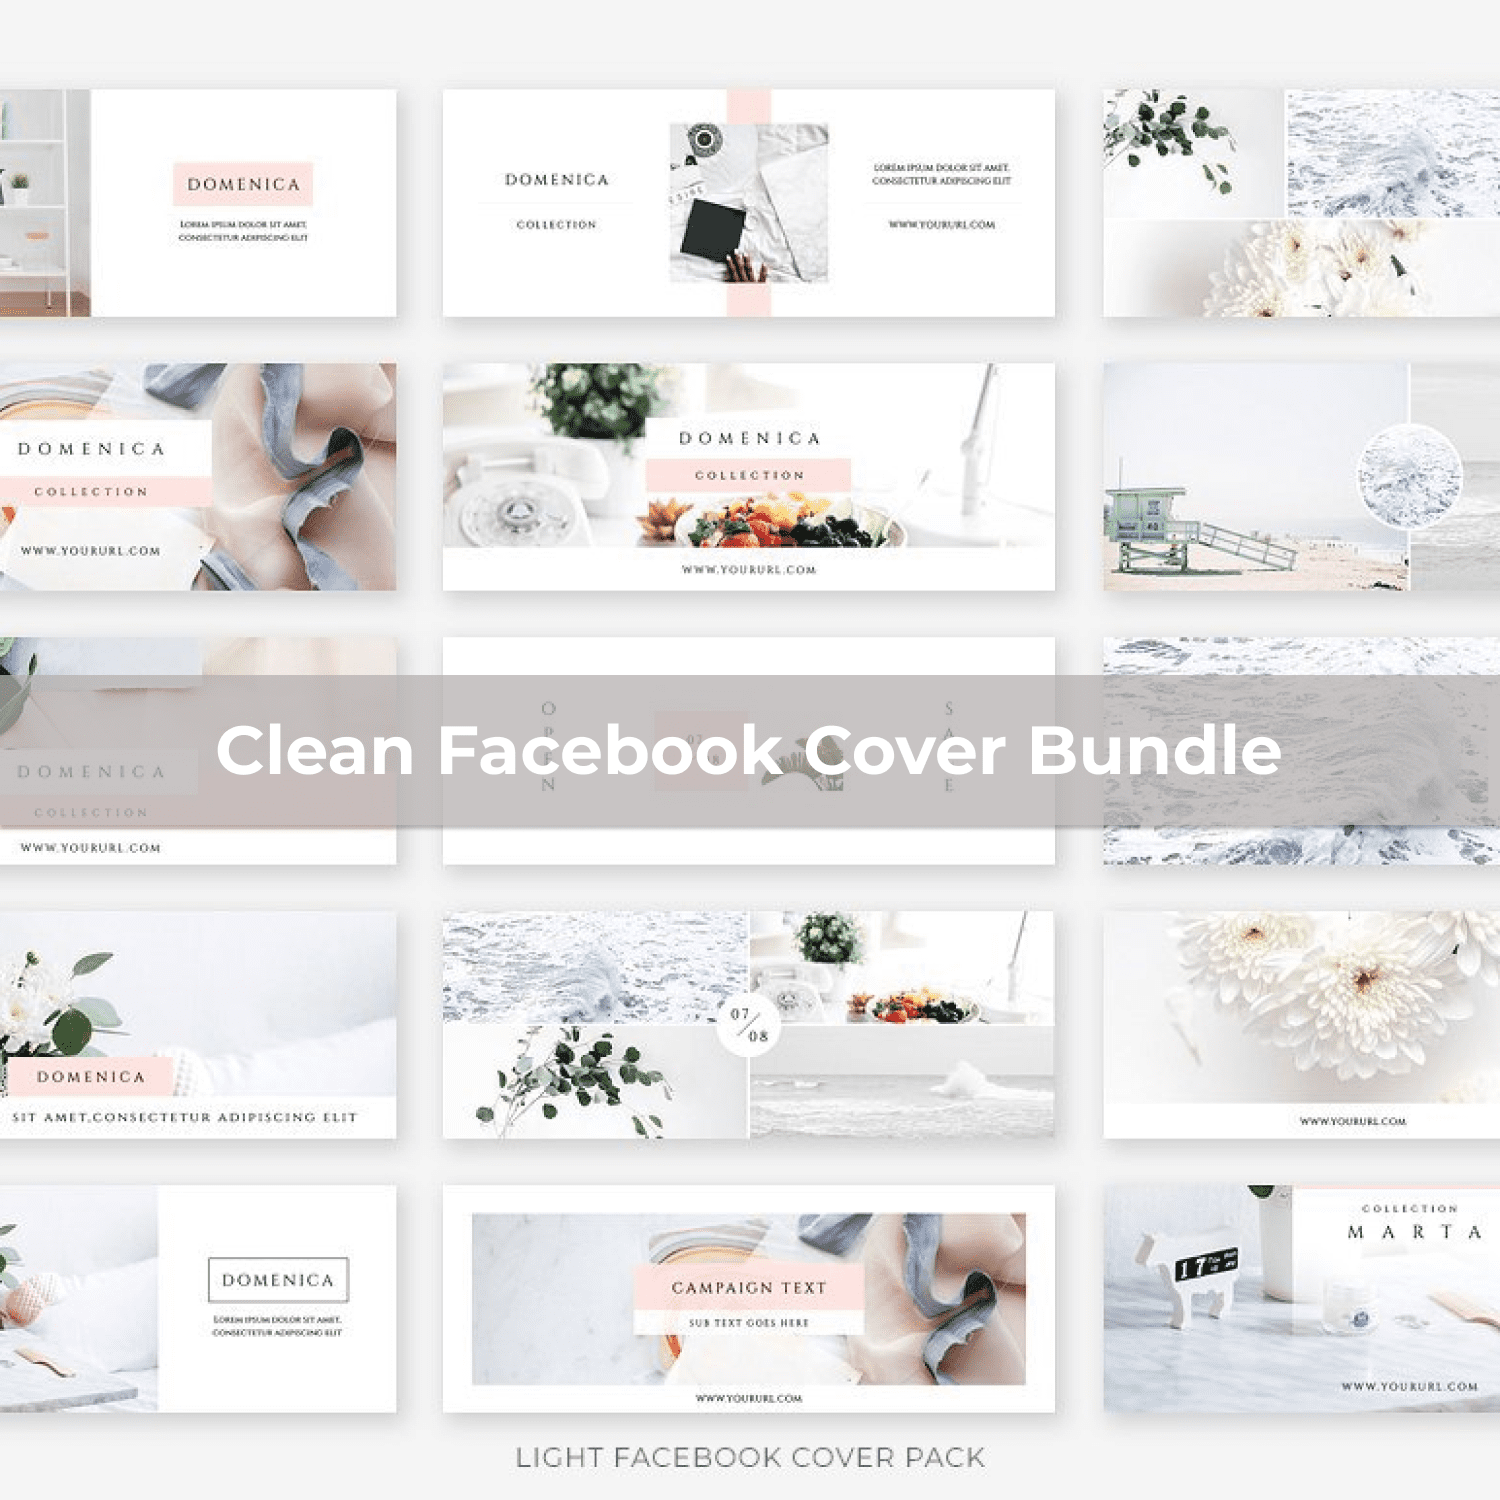 Clean Facebook Cover Bundle main cover.